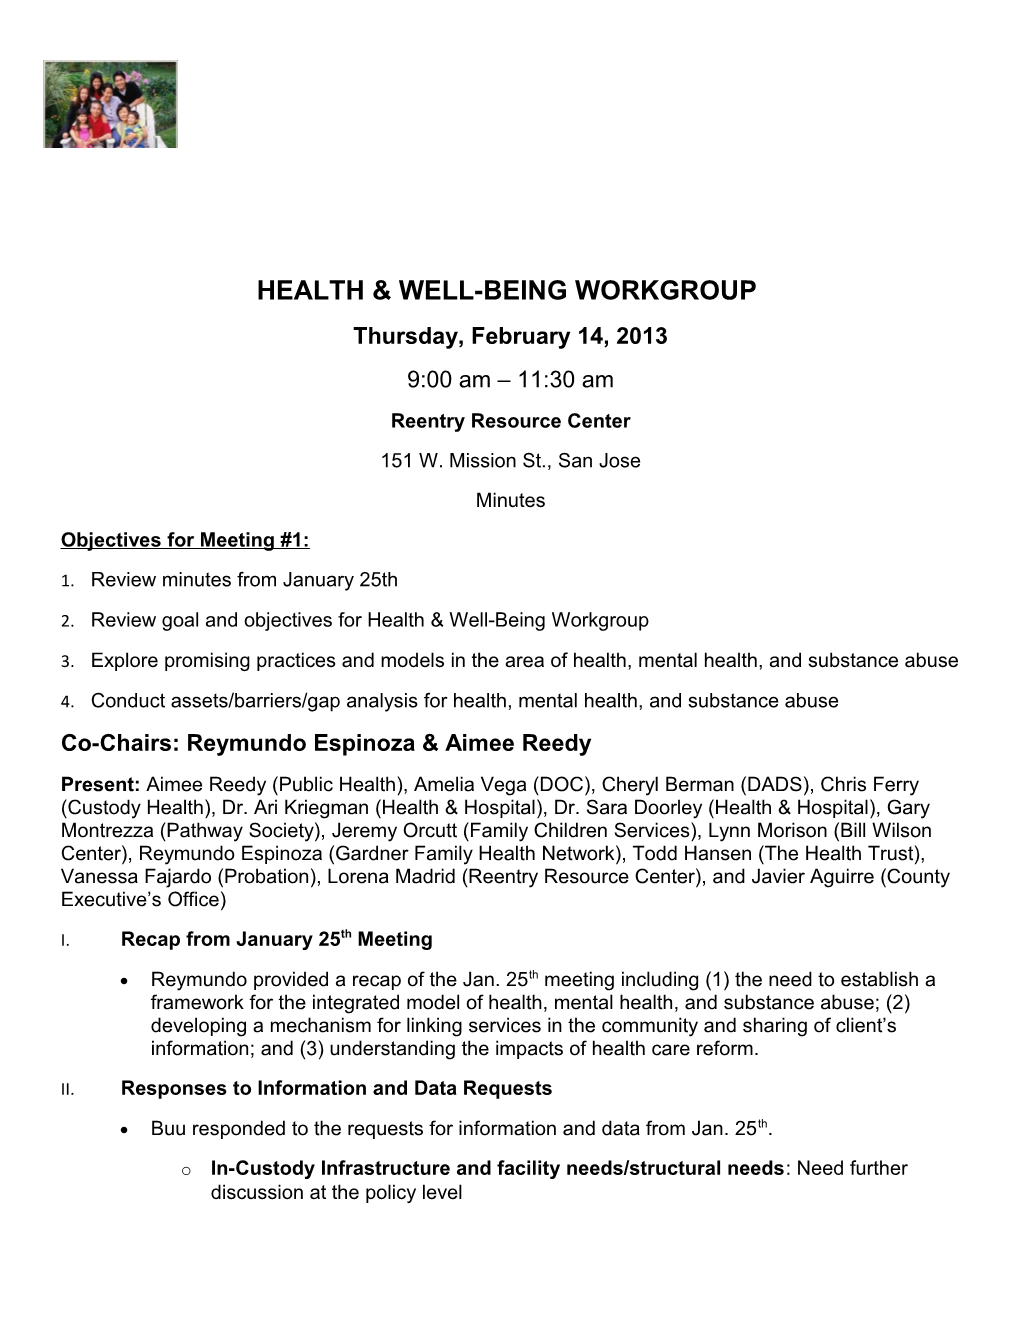 Health & Well-Being Workgroup